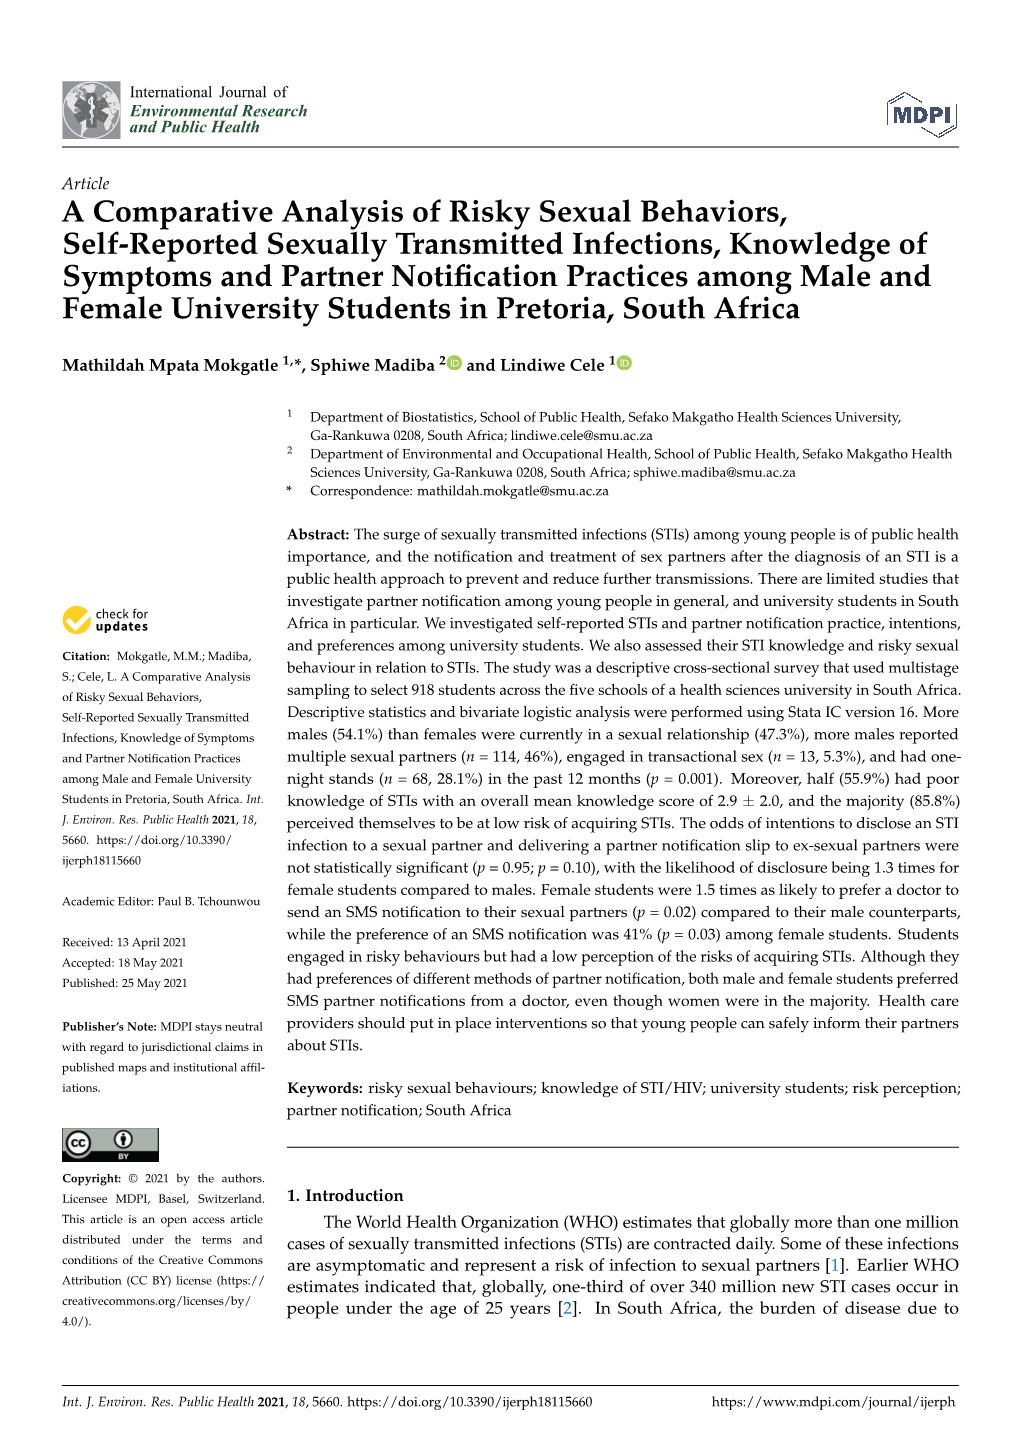 A Comparative Analysis of Risky Sexual Behaviors, Self-Reported